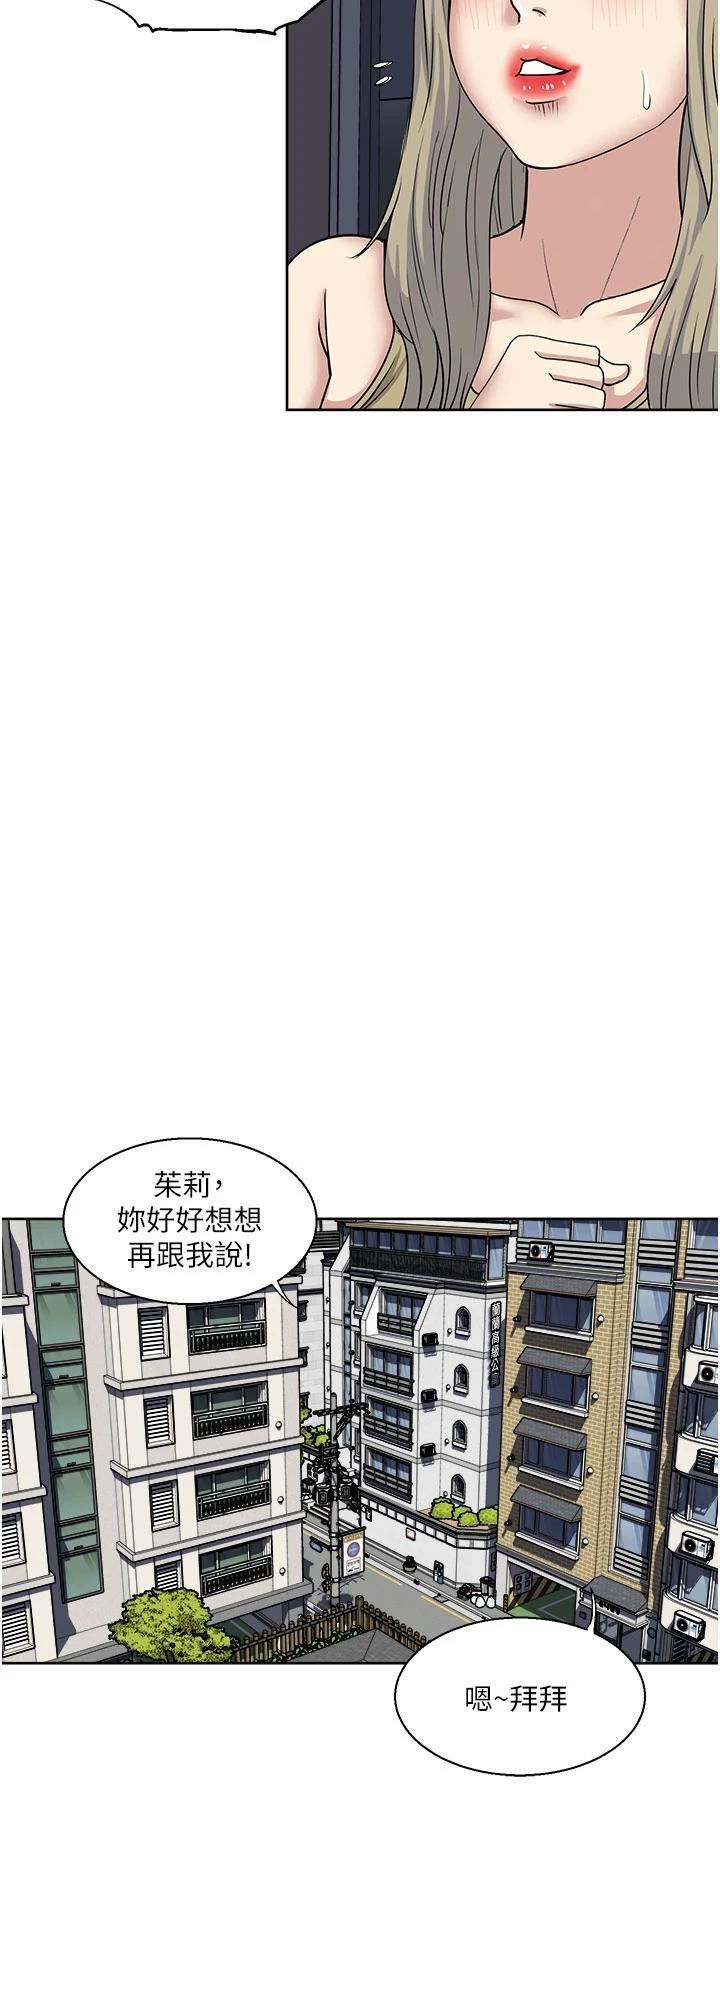 just-once-raw-chap-38-25